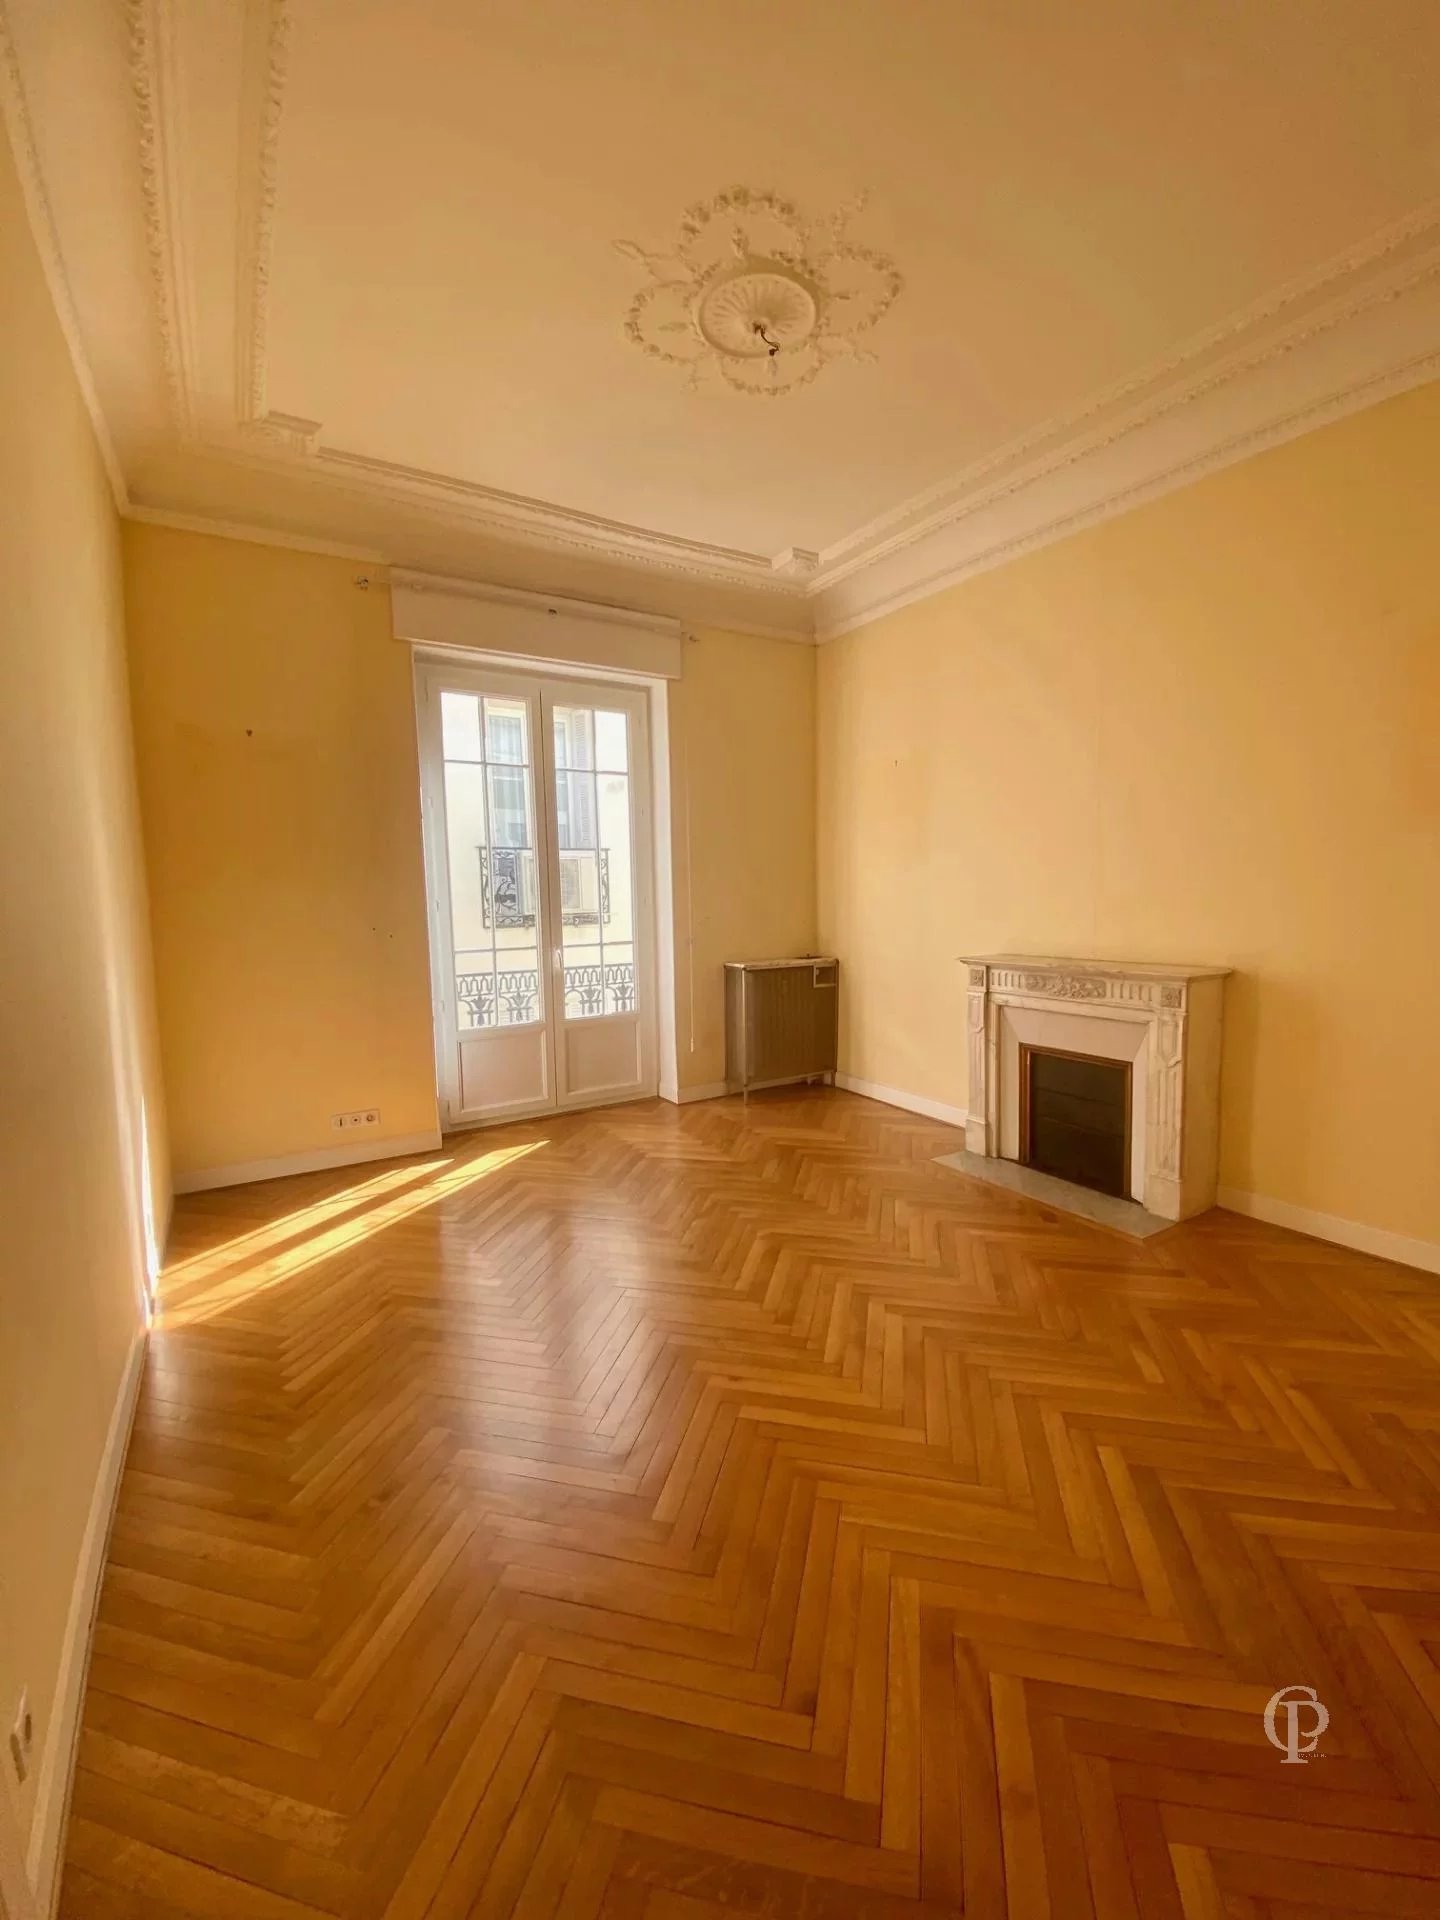 NICE PASSY/PASSY DEPOILLY 2/3 BEDROOMS